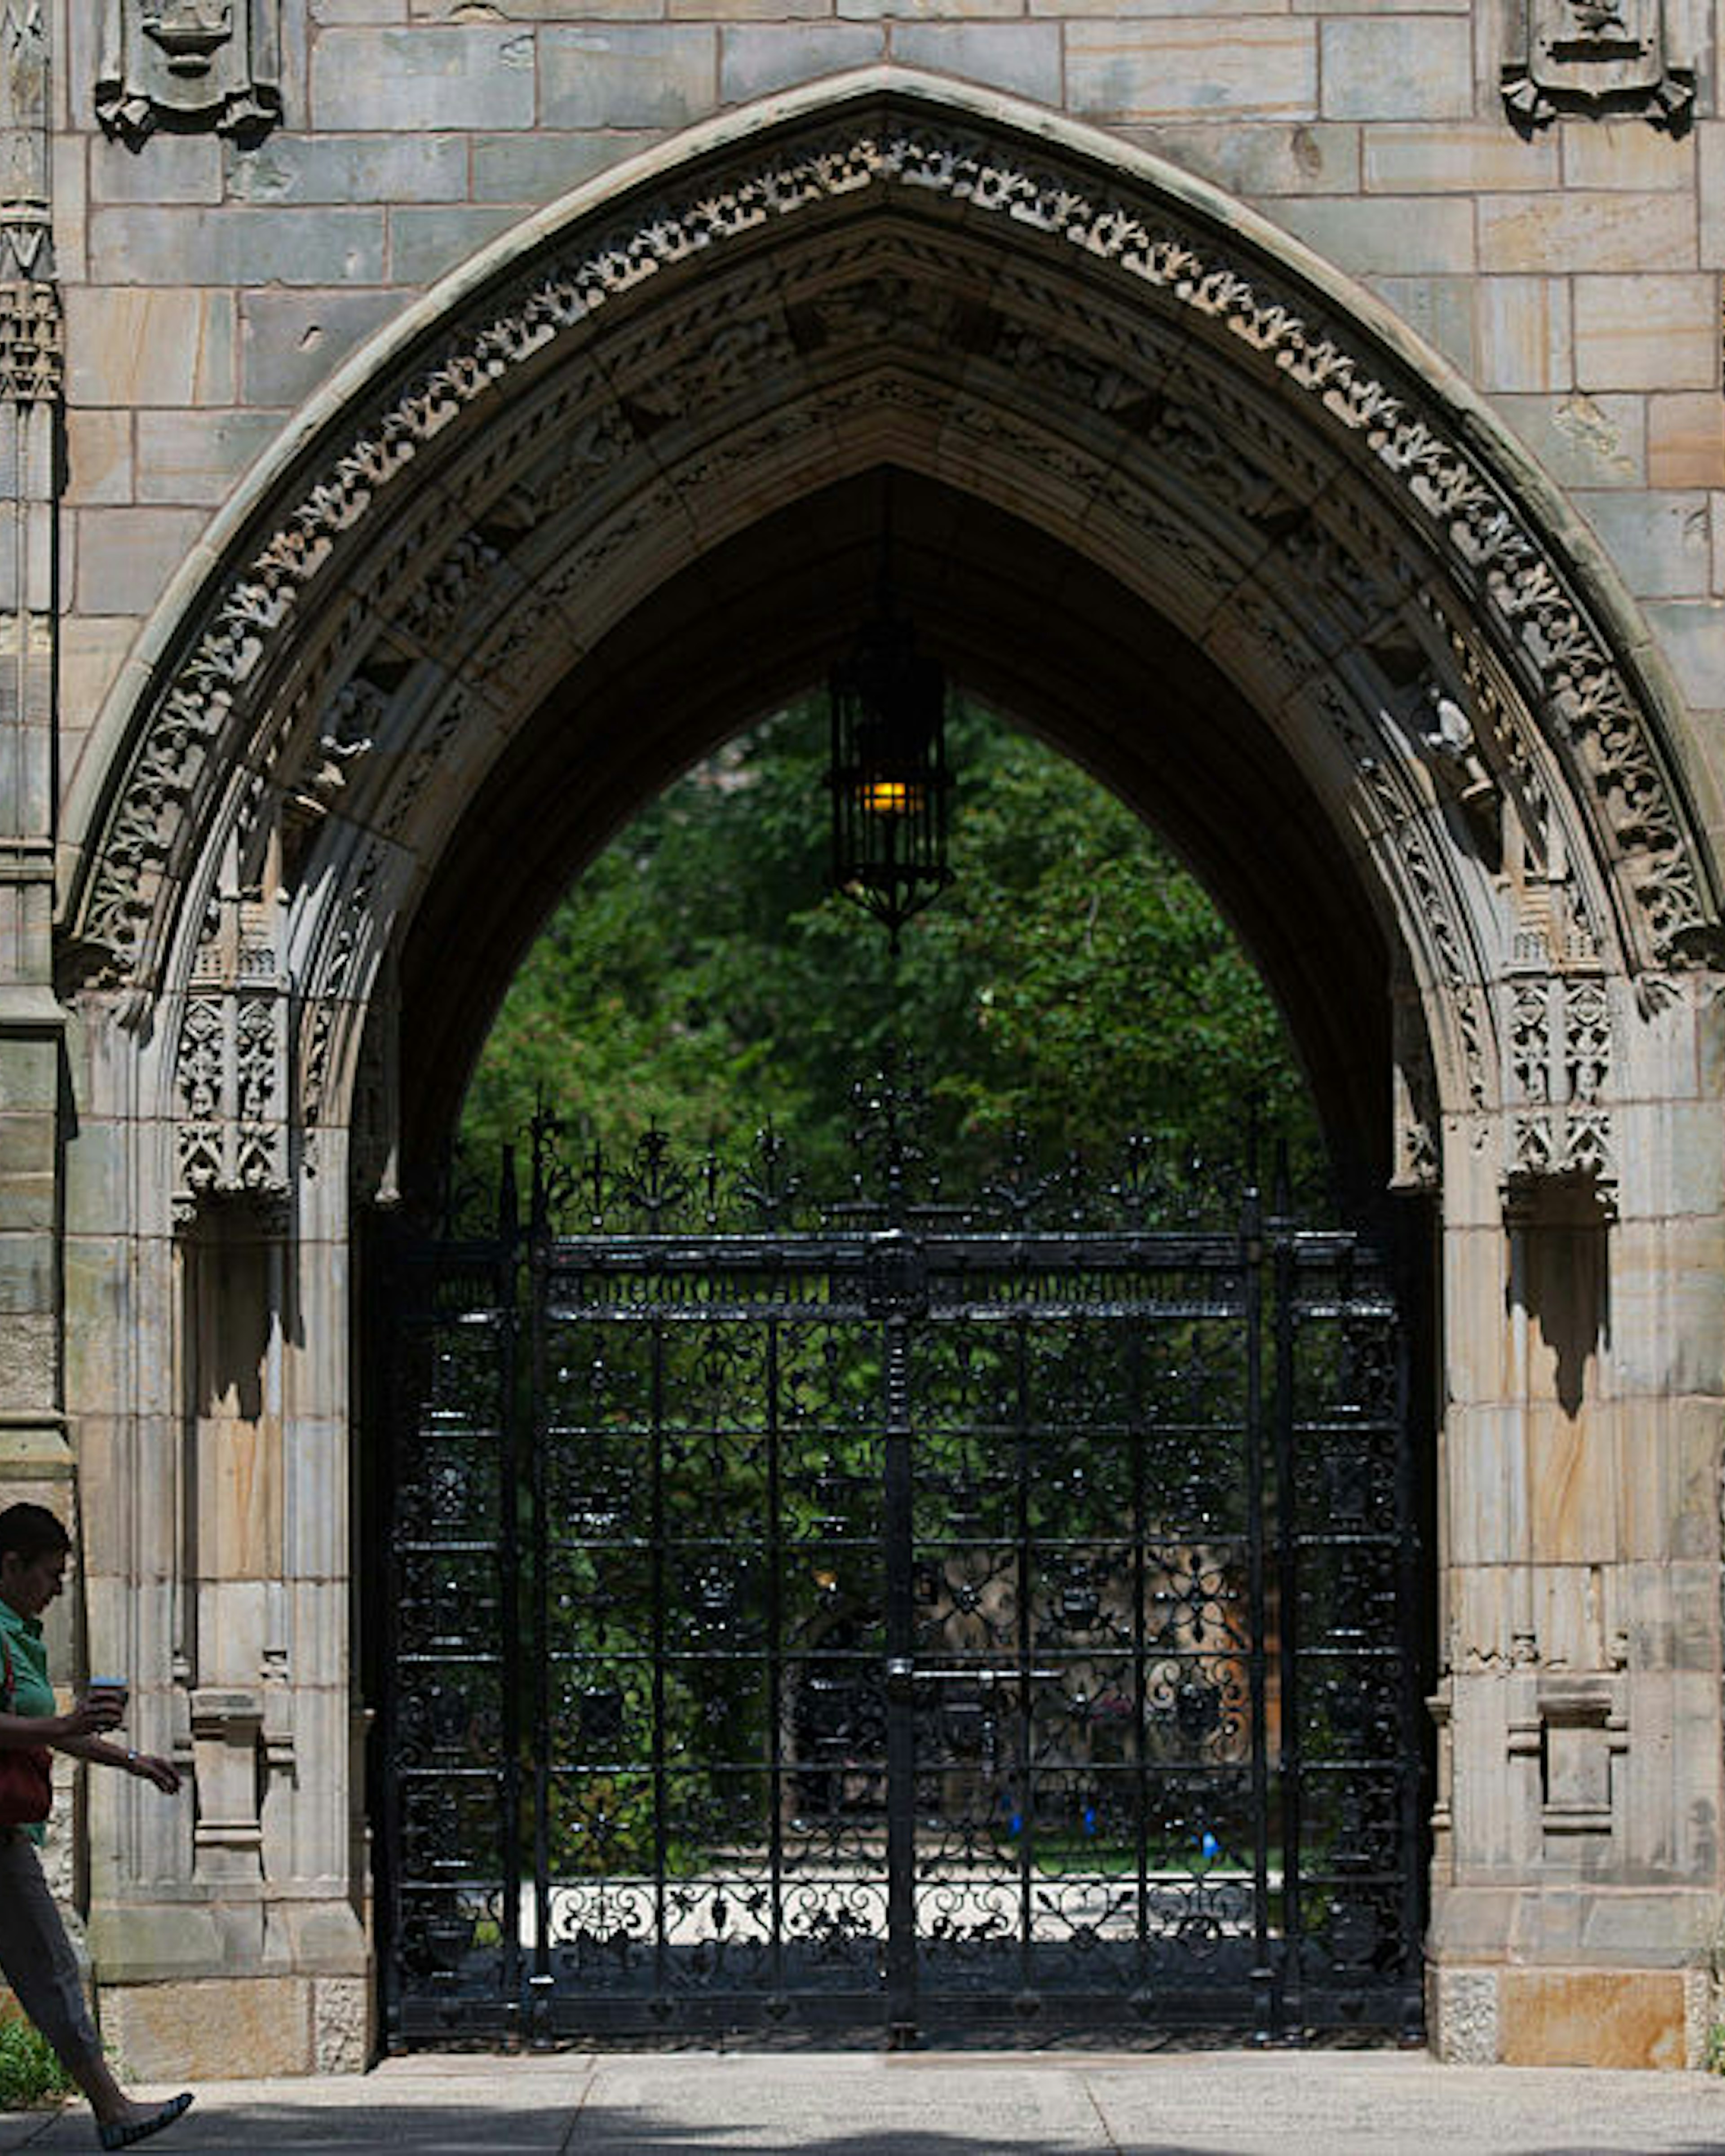 A pedestrian walks past Harkness Gate on the Yale University campus in New Haven, Connecticut, U.S., on Friday, June 12, 2015. Yale University is an educational institute that offers undergraduate degree programs in art, law, engineering, medicine, and nursing as well as graduate level programs. Photographer: Craig Warga/Bloomberg via Getty Images